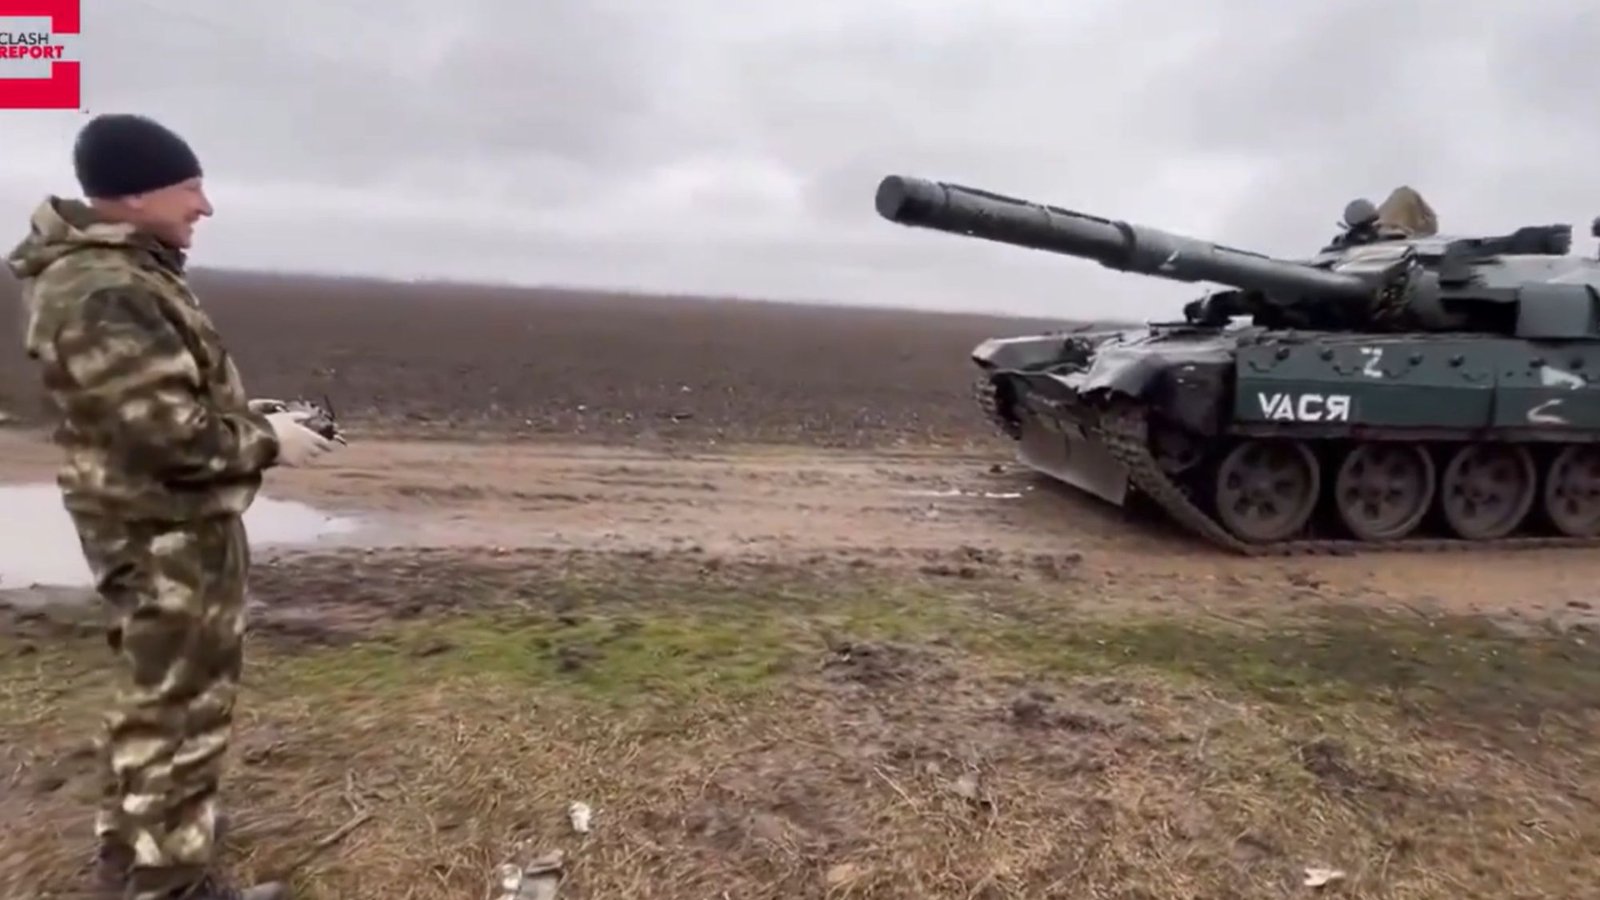 Desperate Putin testing remote controlled drone Z Tanks as Russia is running out of crews in meatgrinder invasion